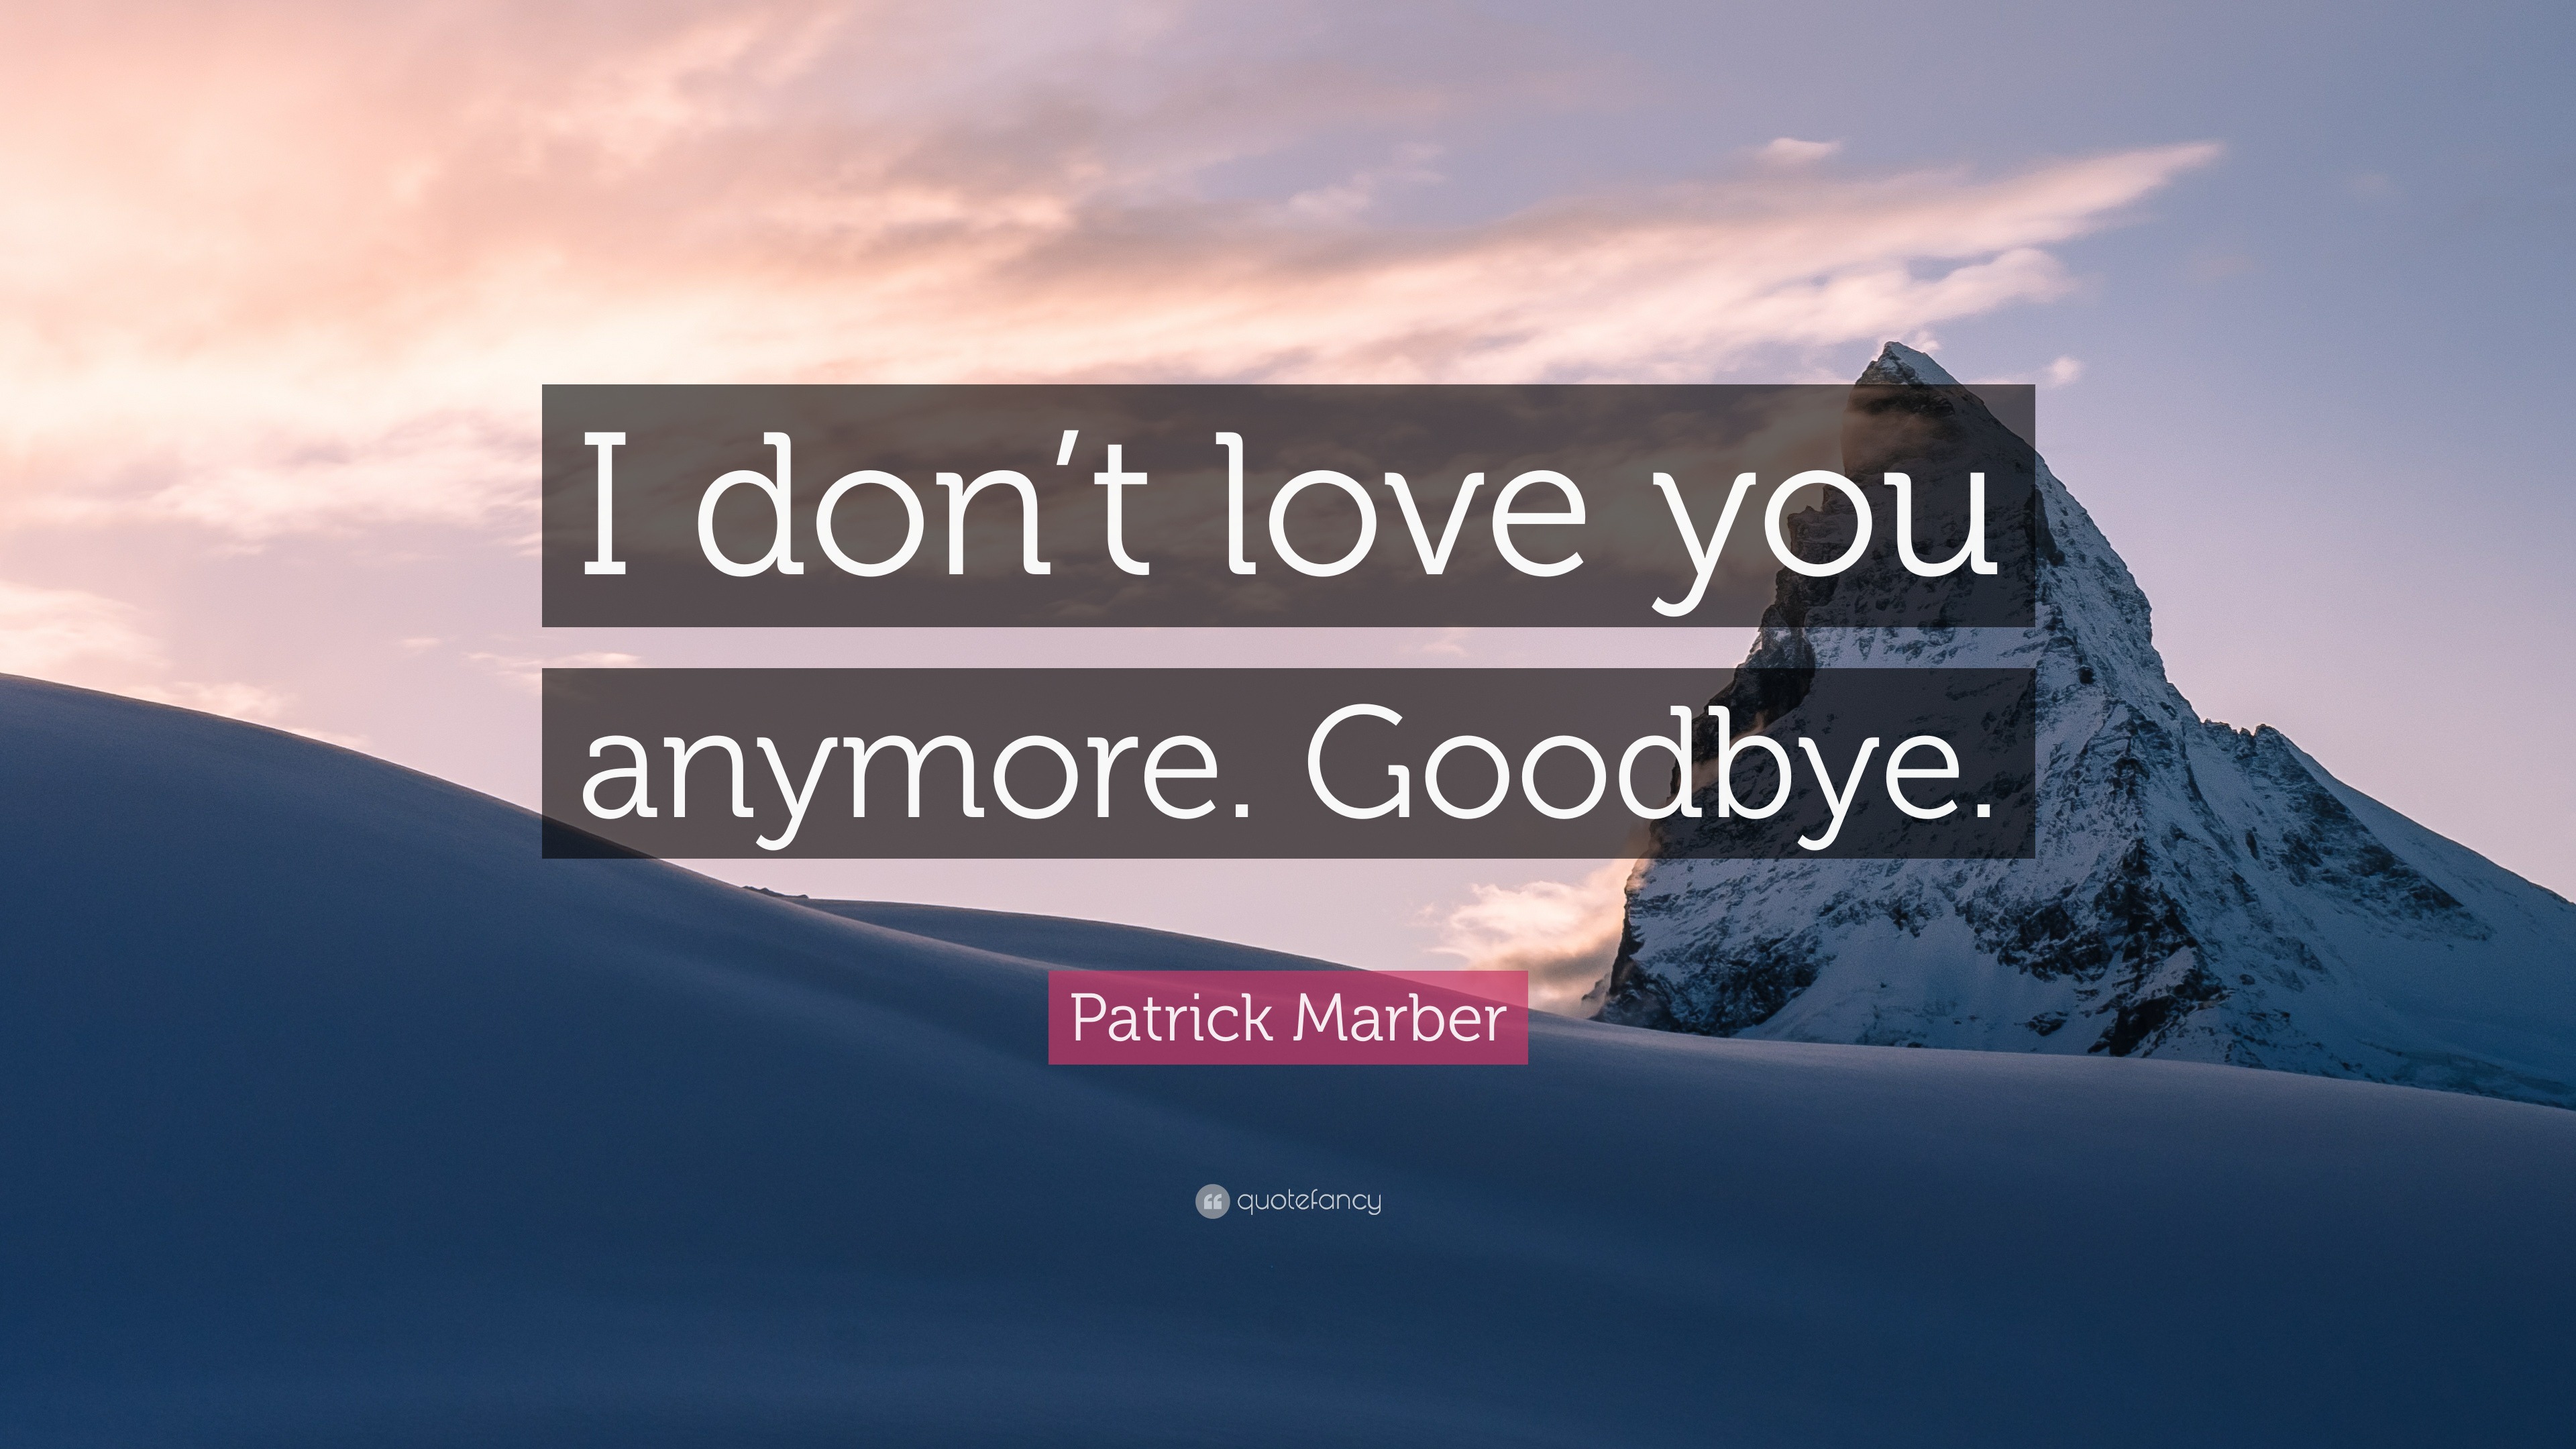 Patrick Marber Quote “I don t love you anymore Goodbye ”